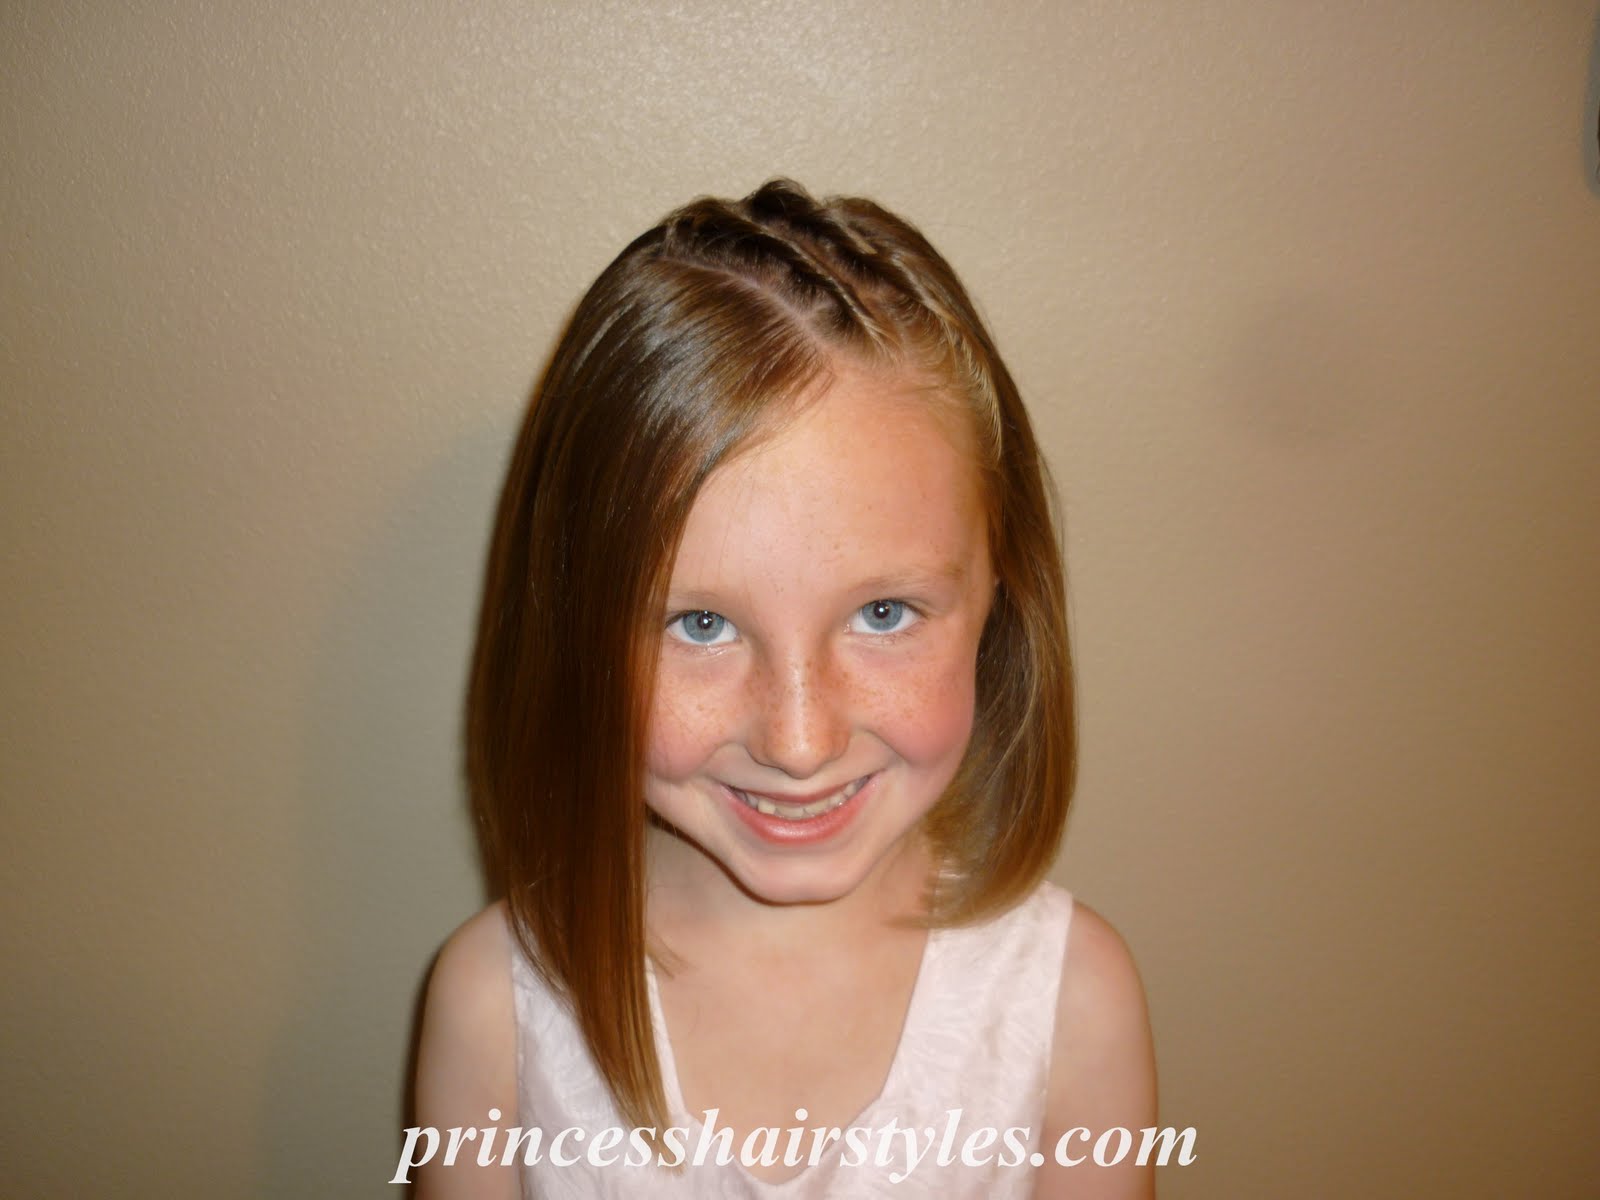 Hairstyles For Girls - Hair Styles - Braiding - Princess Hairstyles